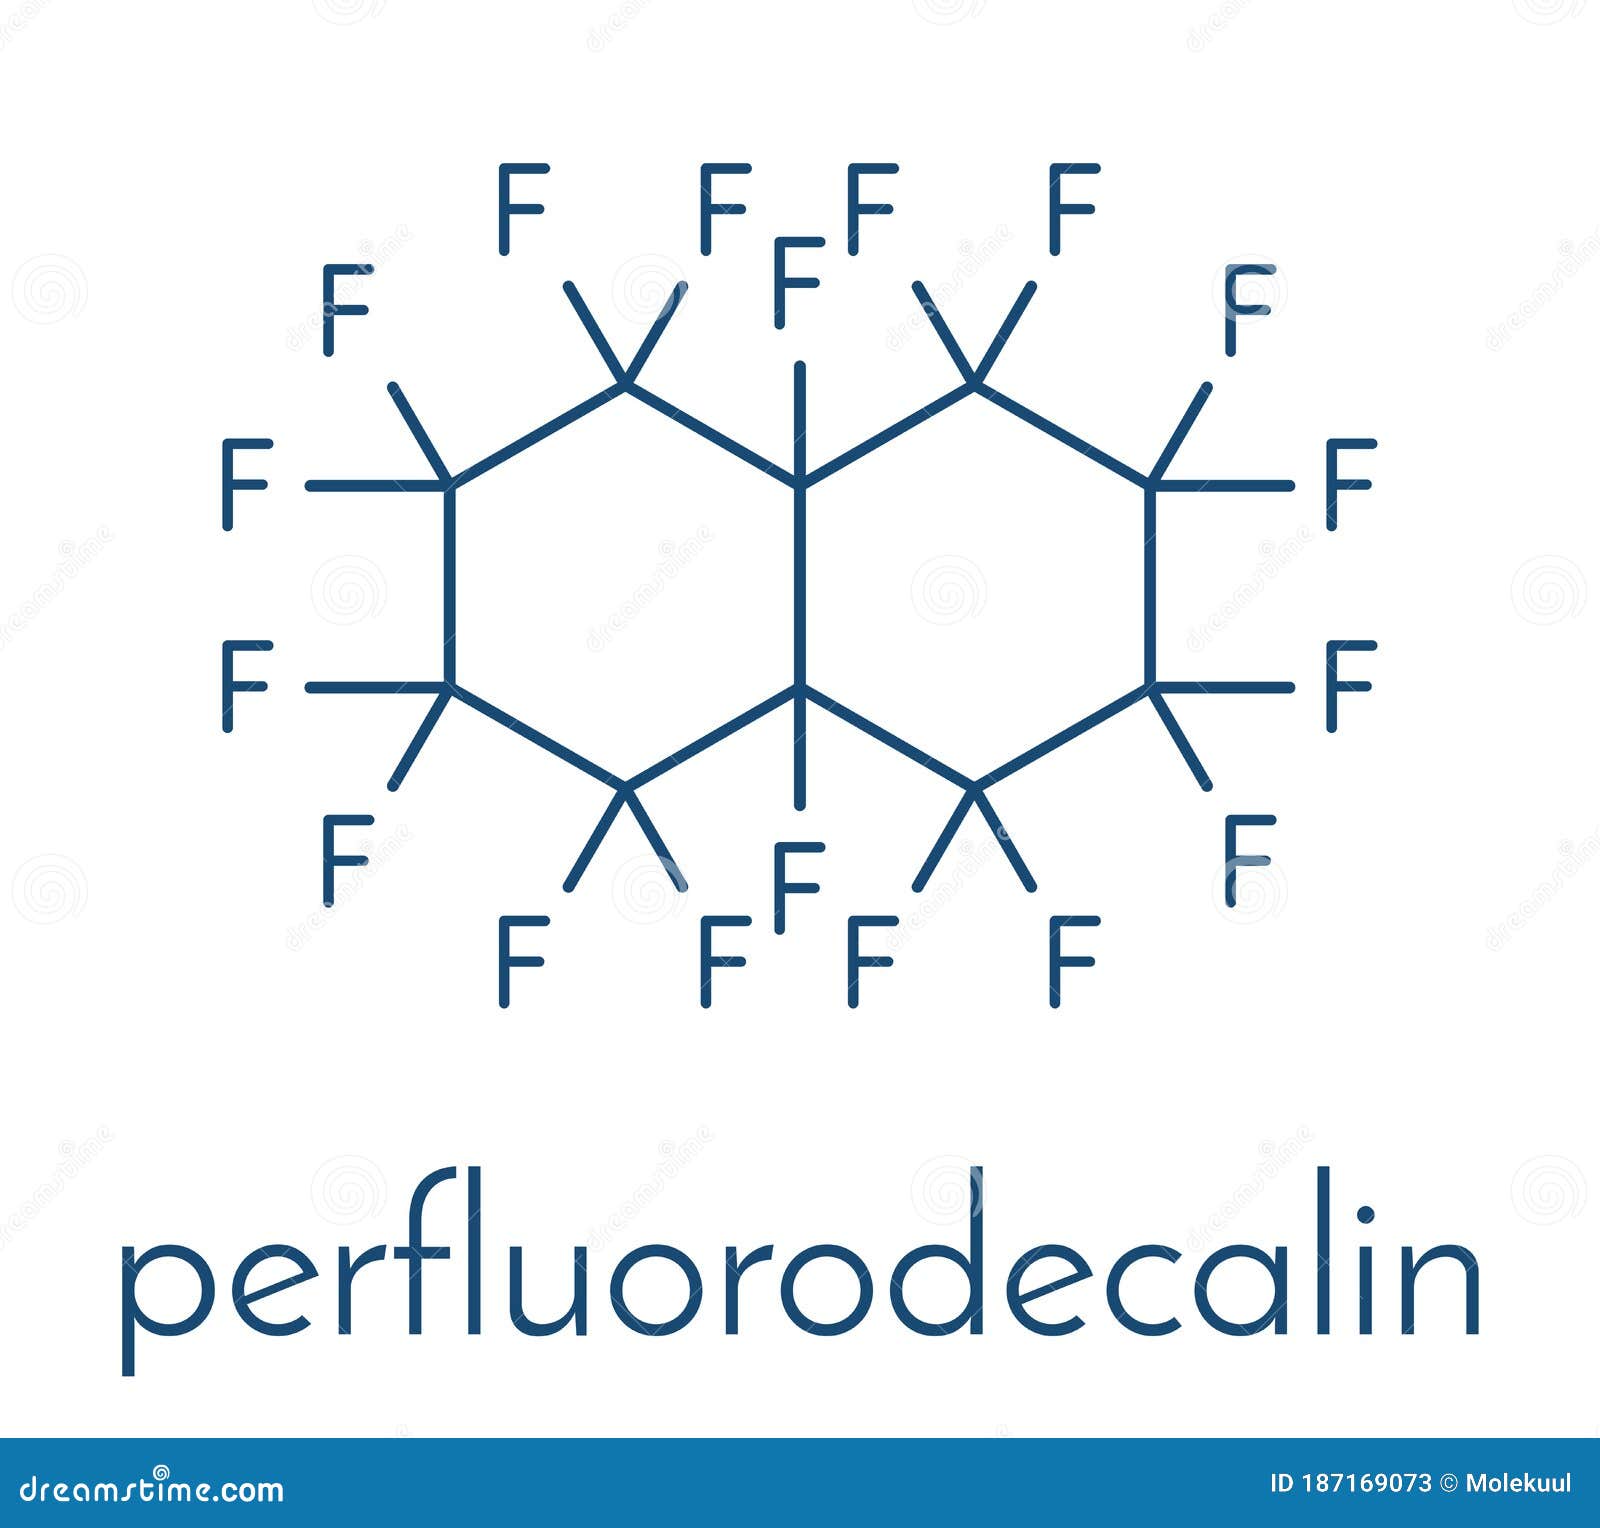 Perfluorodecalin Fluorocarbon Molecule. Used As Component of